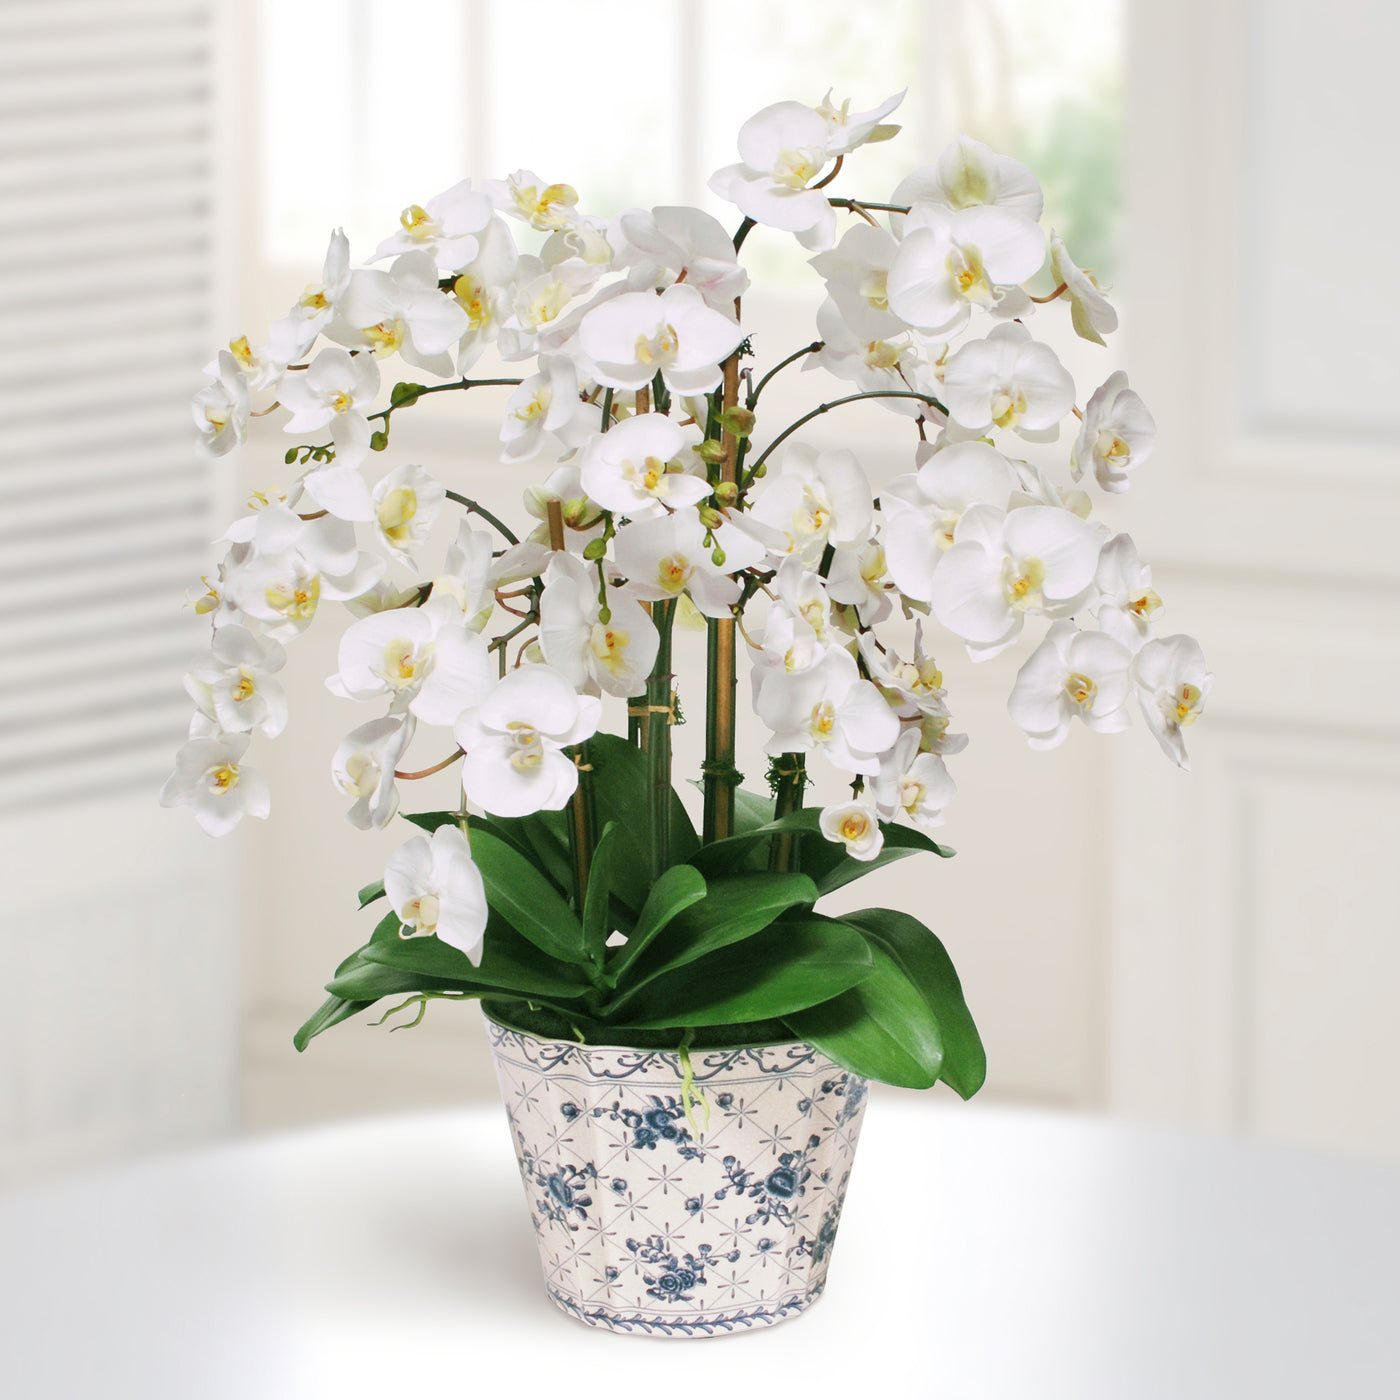 White artificial phalaenopsis orchids in chinoiserie white and blue container